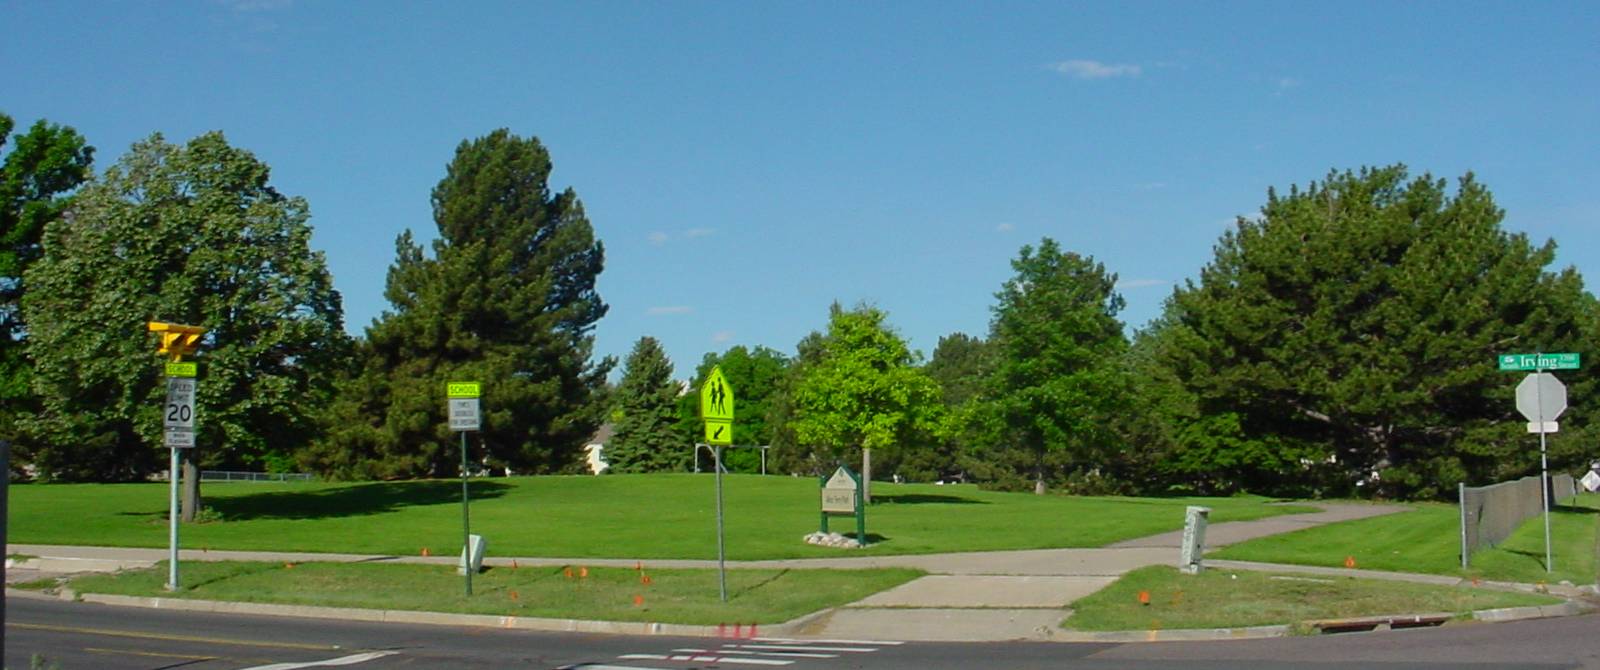 Picture of Alice Terry park looking southwest.